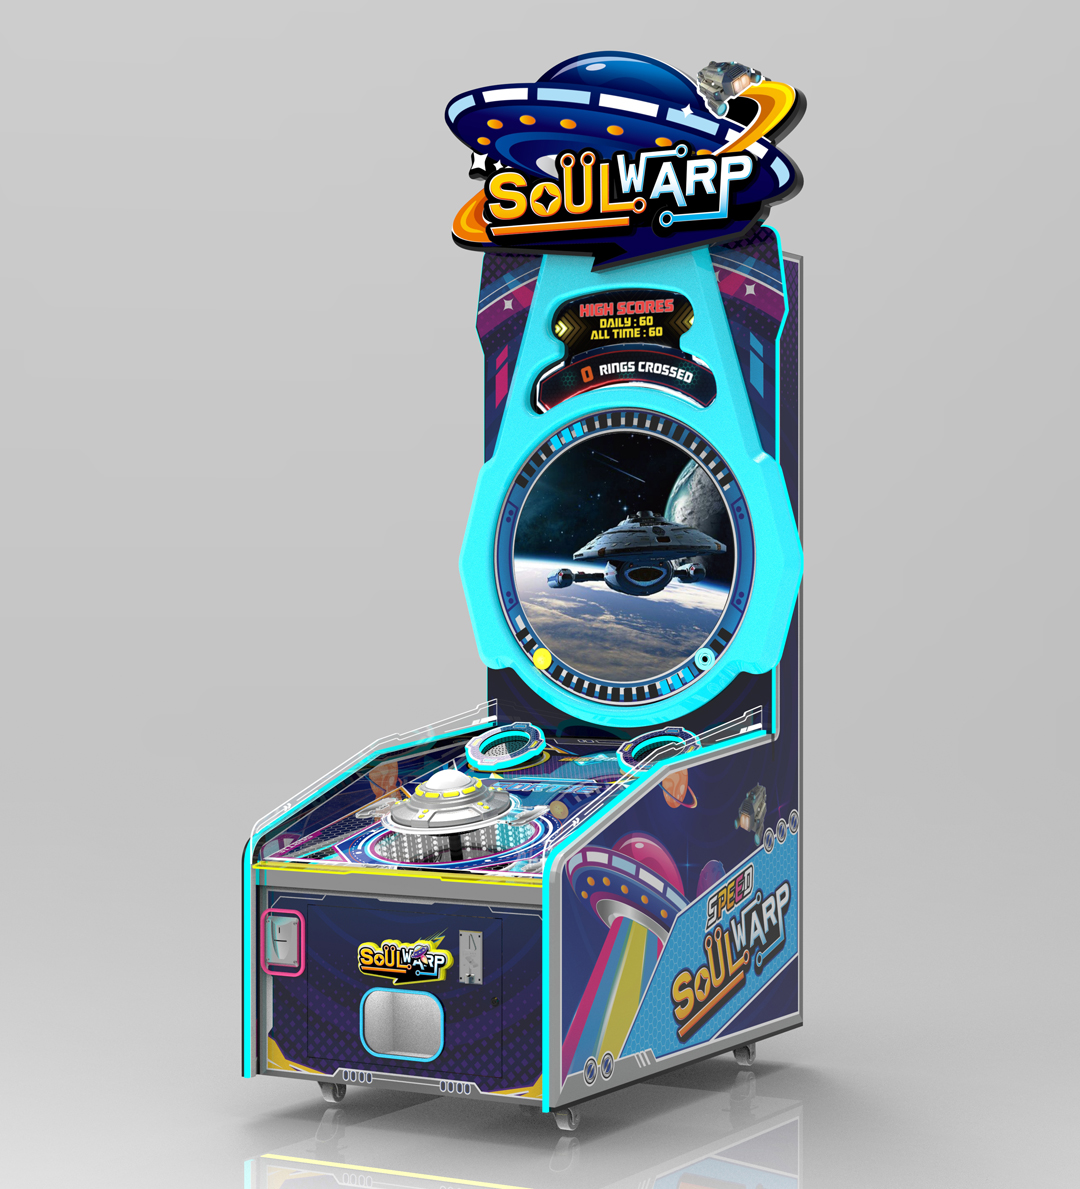 2023 Dinibao newest design arcade coin operated game Soul Warp redemption lottery tickets game machine for amusement